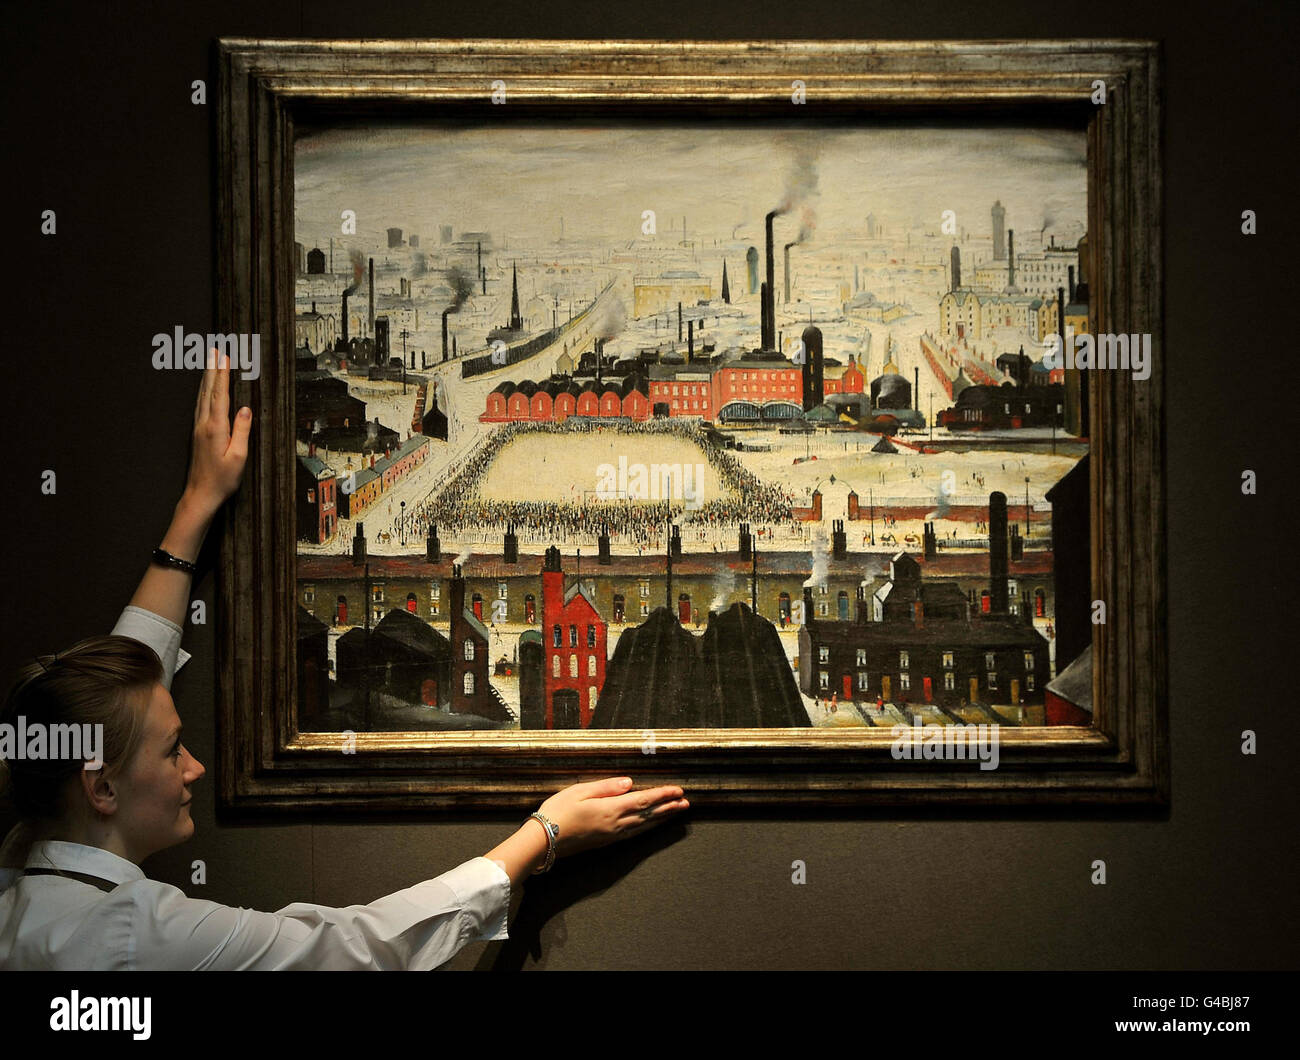 The Football Match by L S Lowry (Lawrence Stephen, 1887-1976) is hung on display at Christies Auctioneers in St James's central London, where it is expected to be sold for between 3.5 - 4.5million. Stock Photo